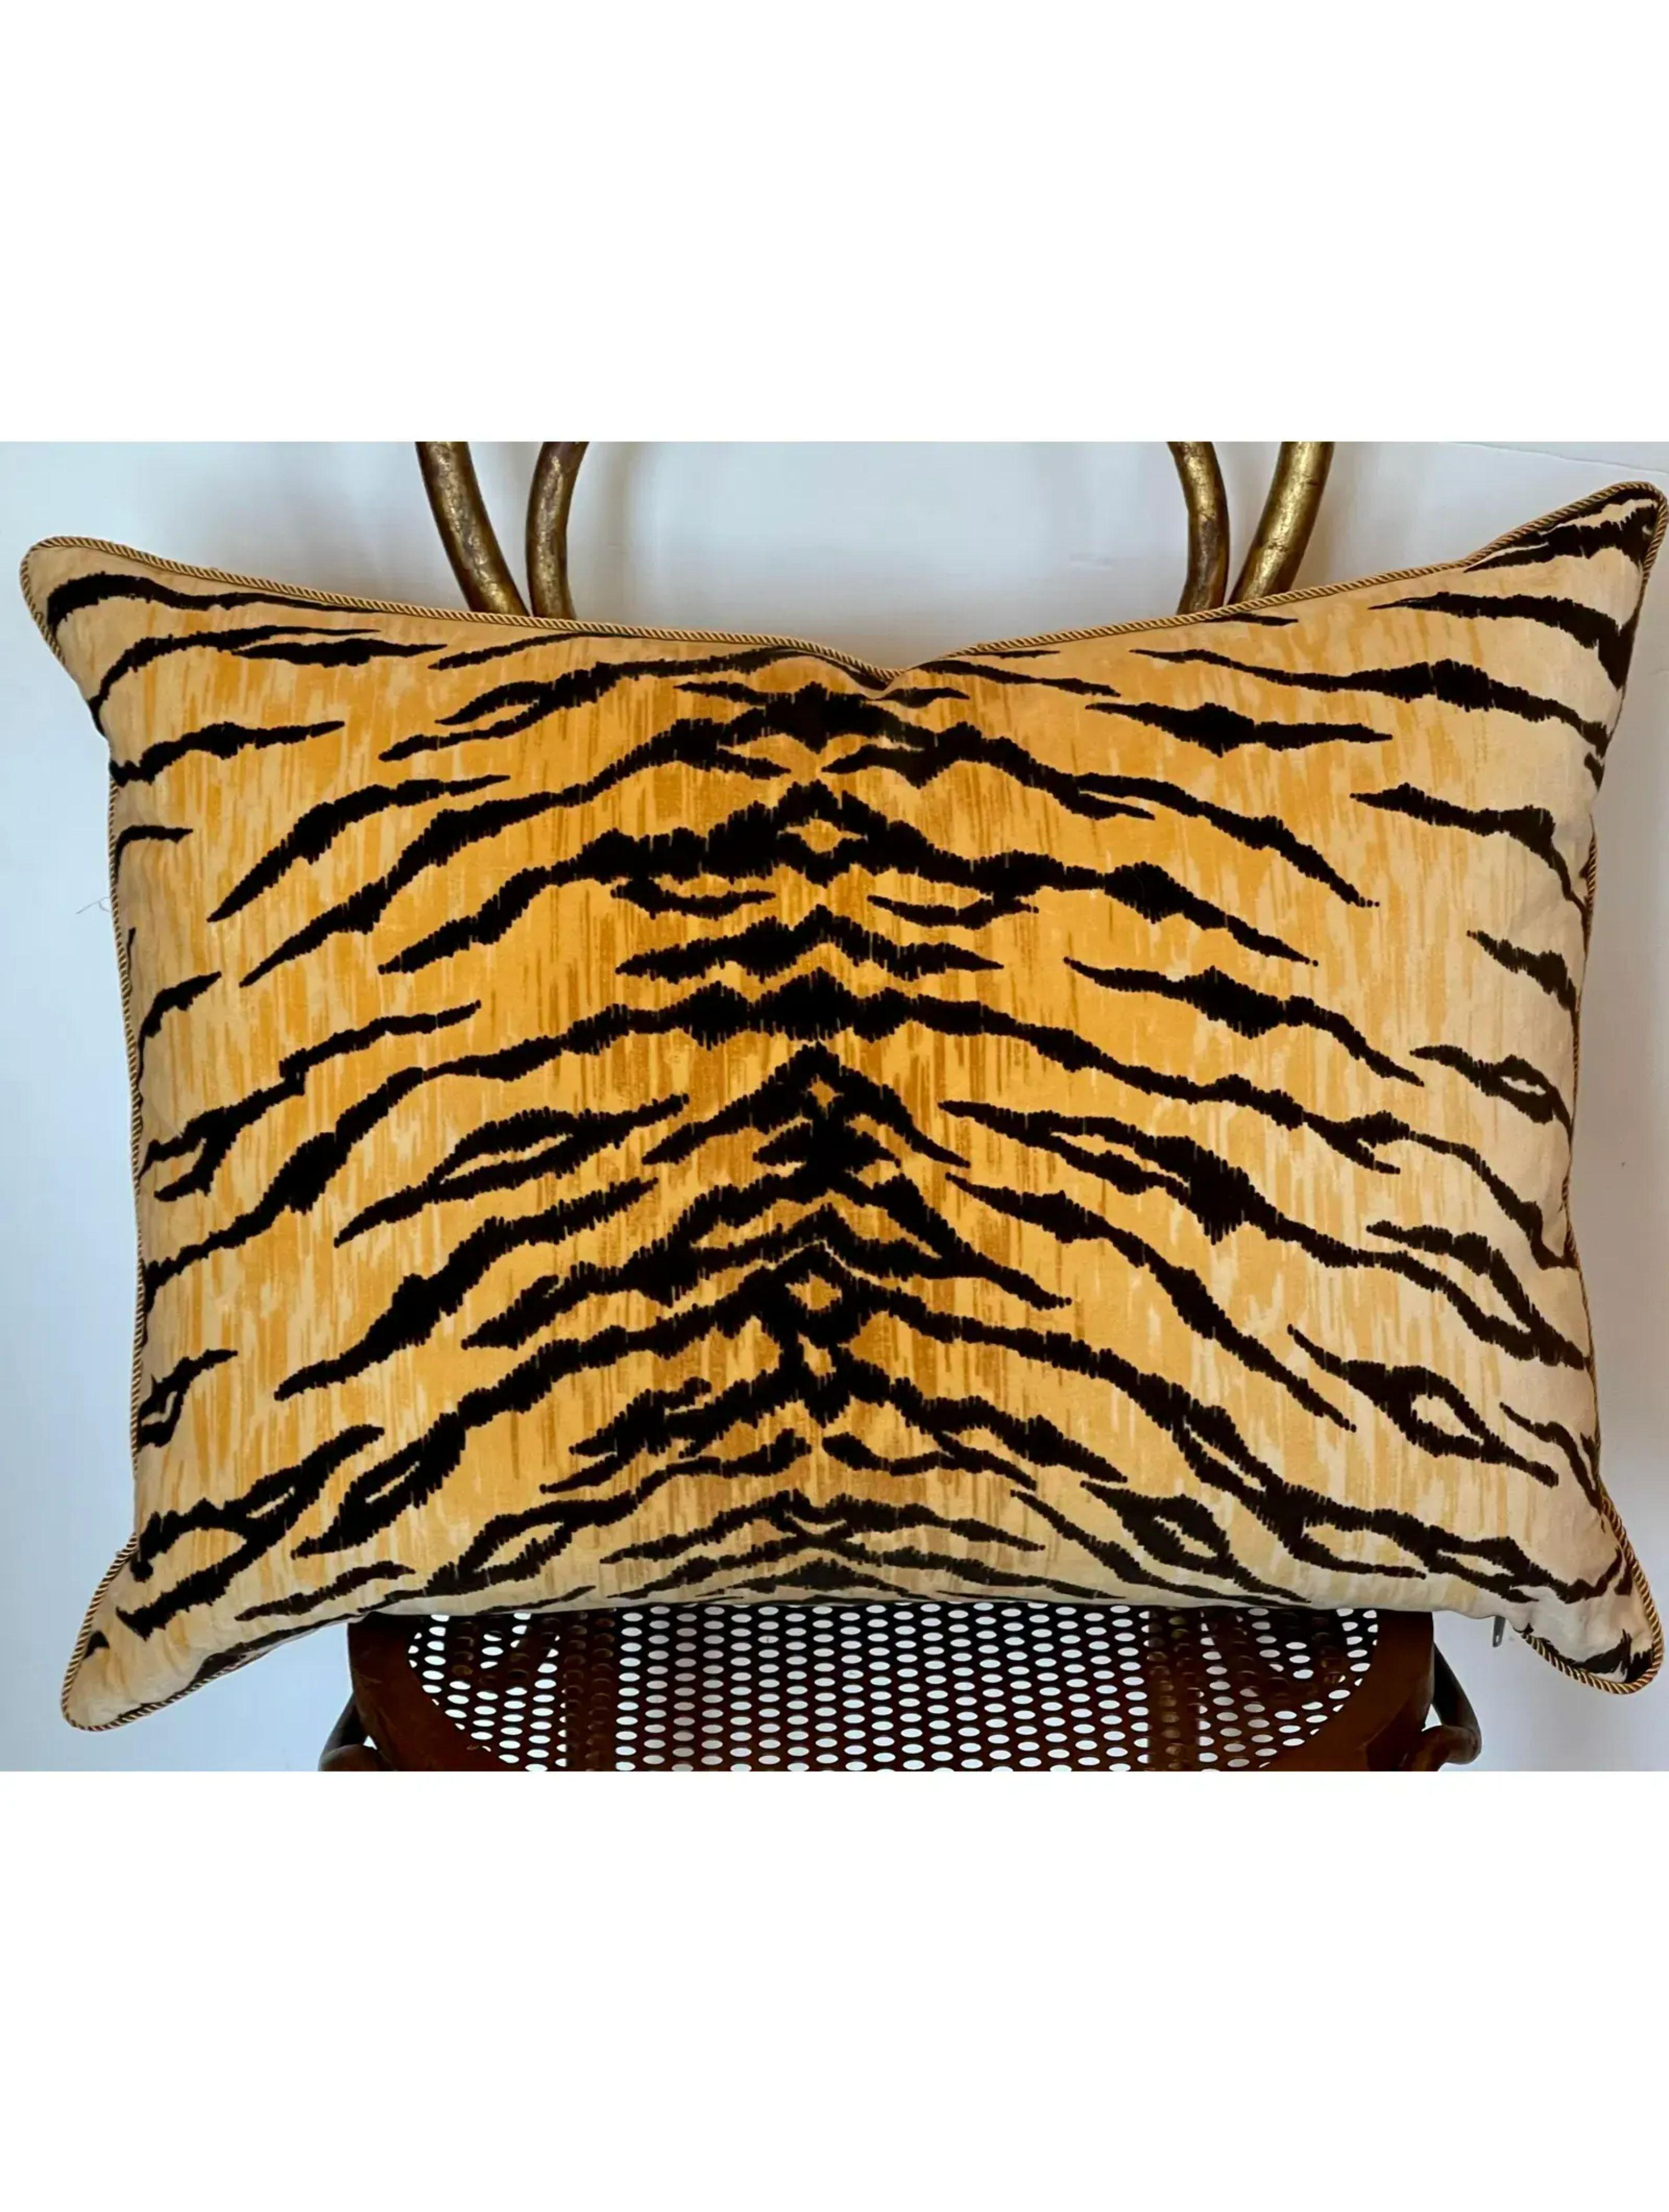 Feathers Clarence House Tiger Velvet Silk Down Feather Pillow, 2010s